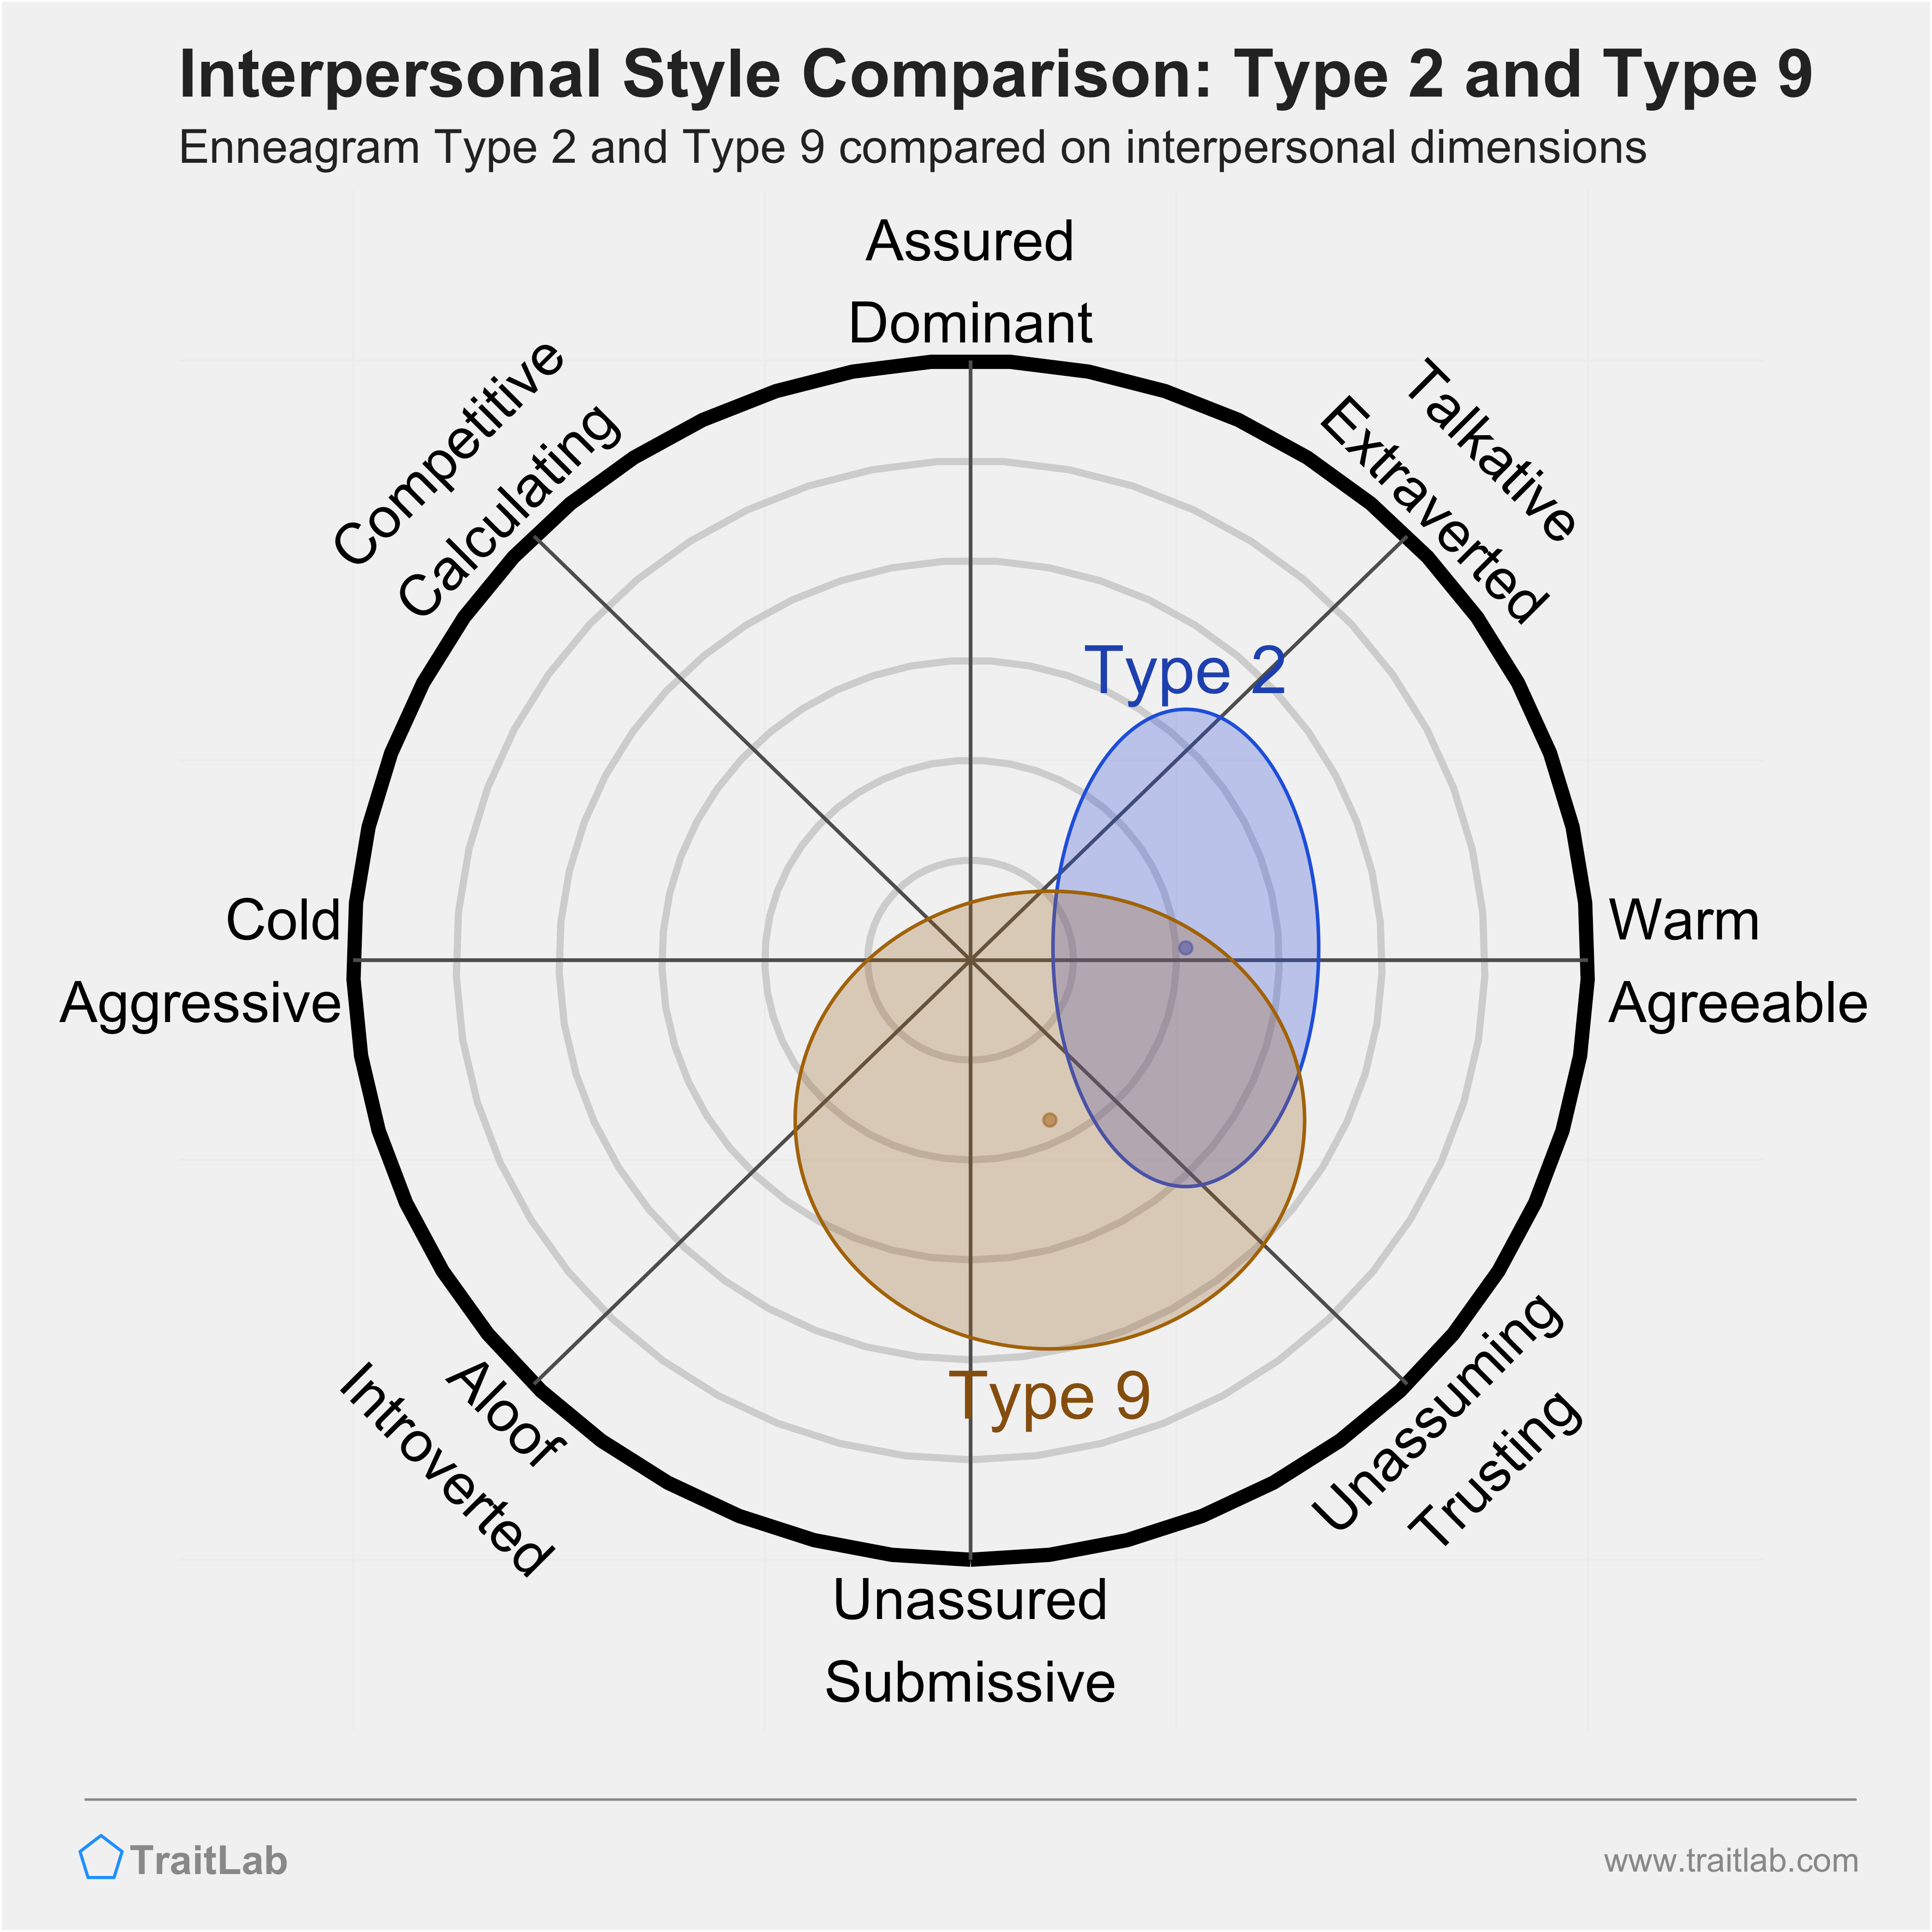 Enneagram Type 2 and Type 9 comparison across interpersonal dimensions